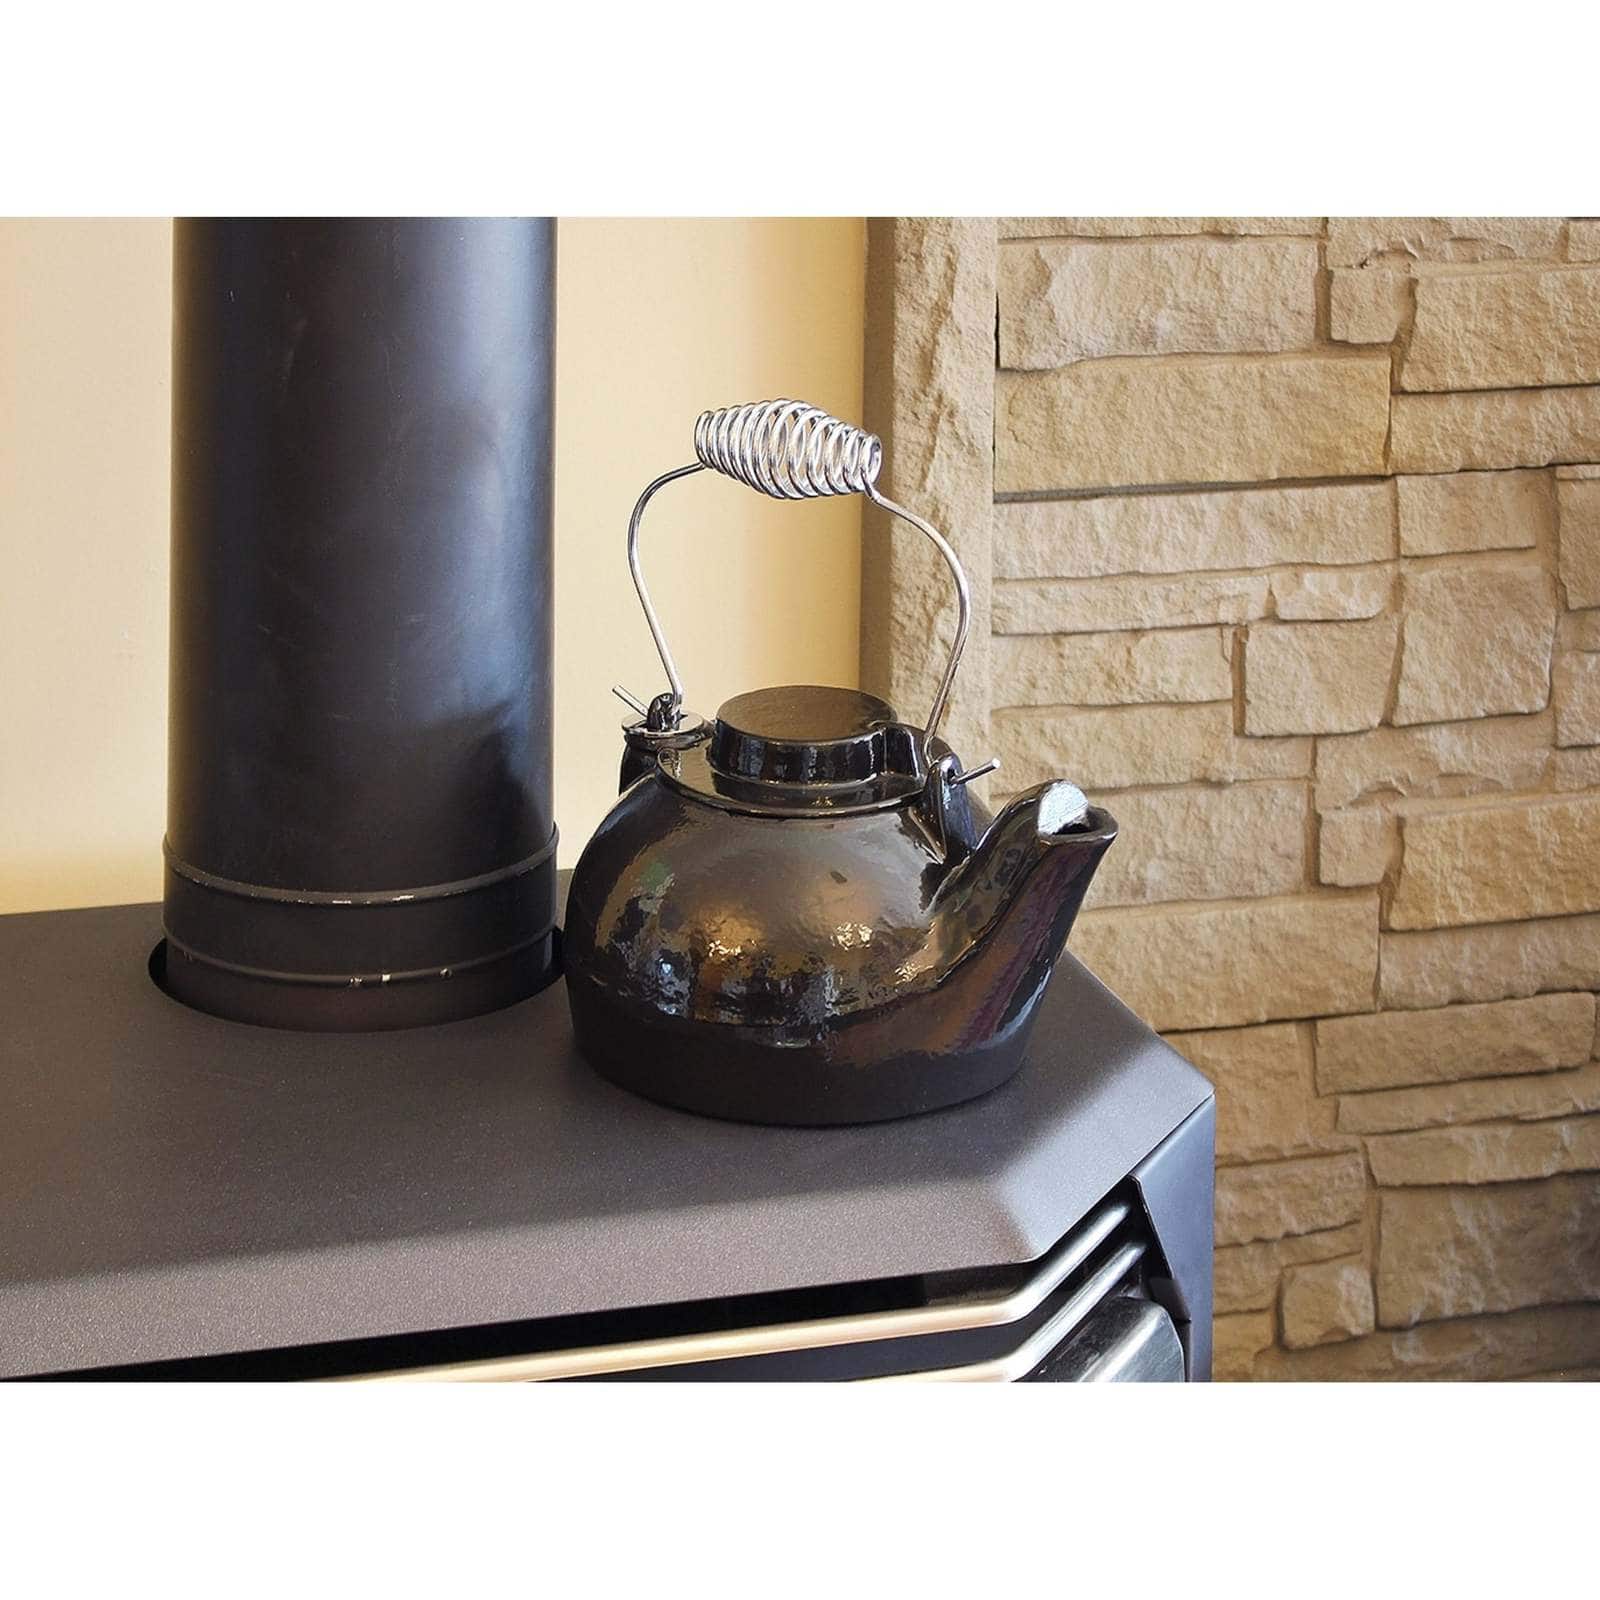 Top Your Stove with a Kettle